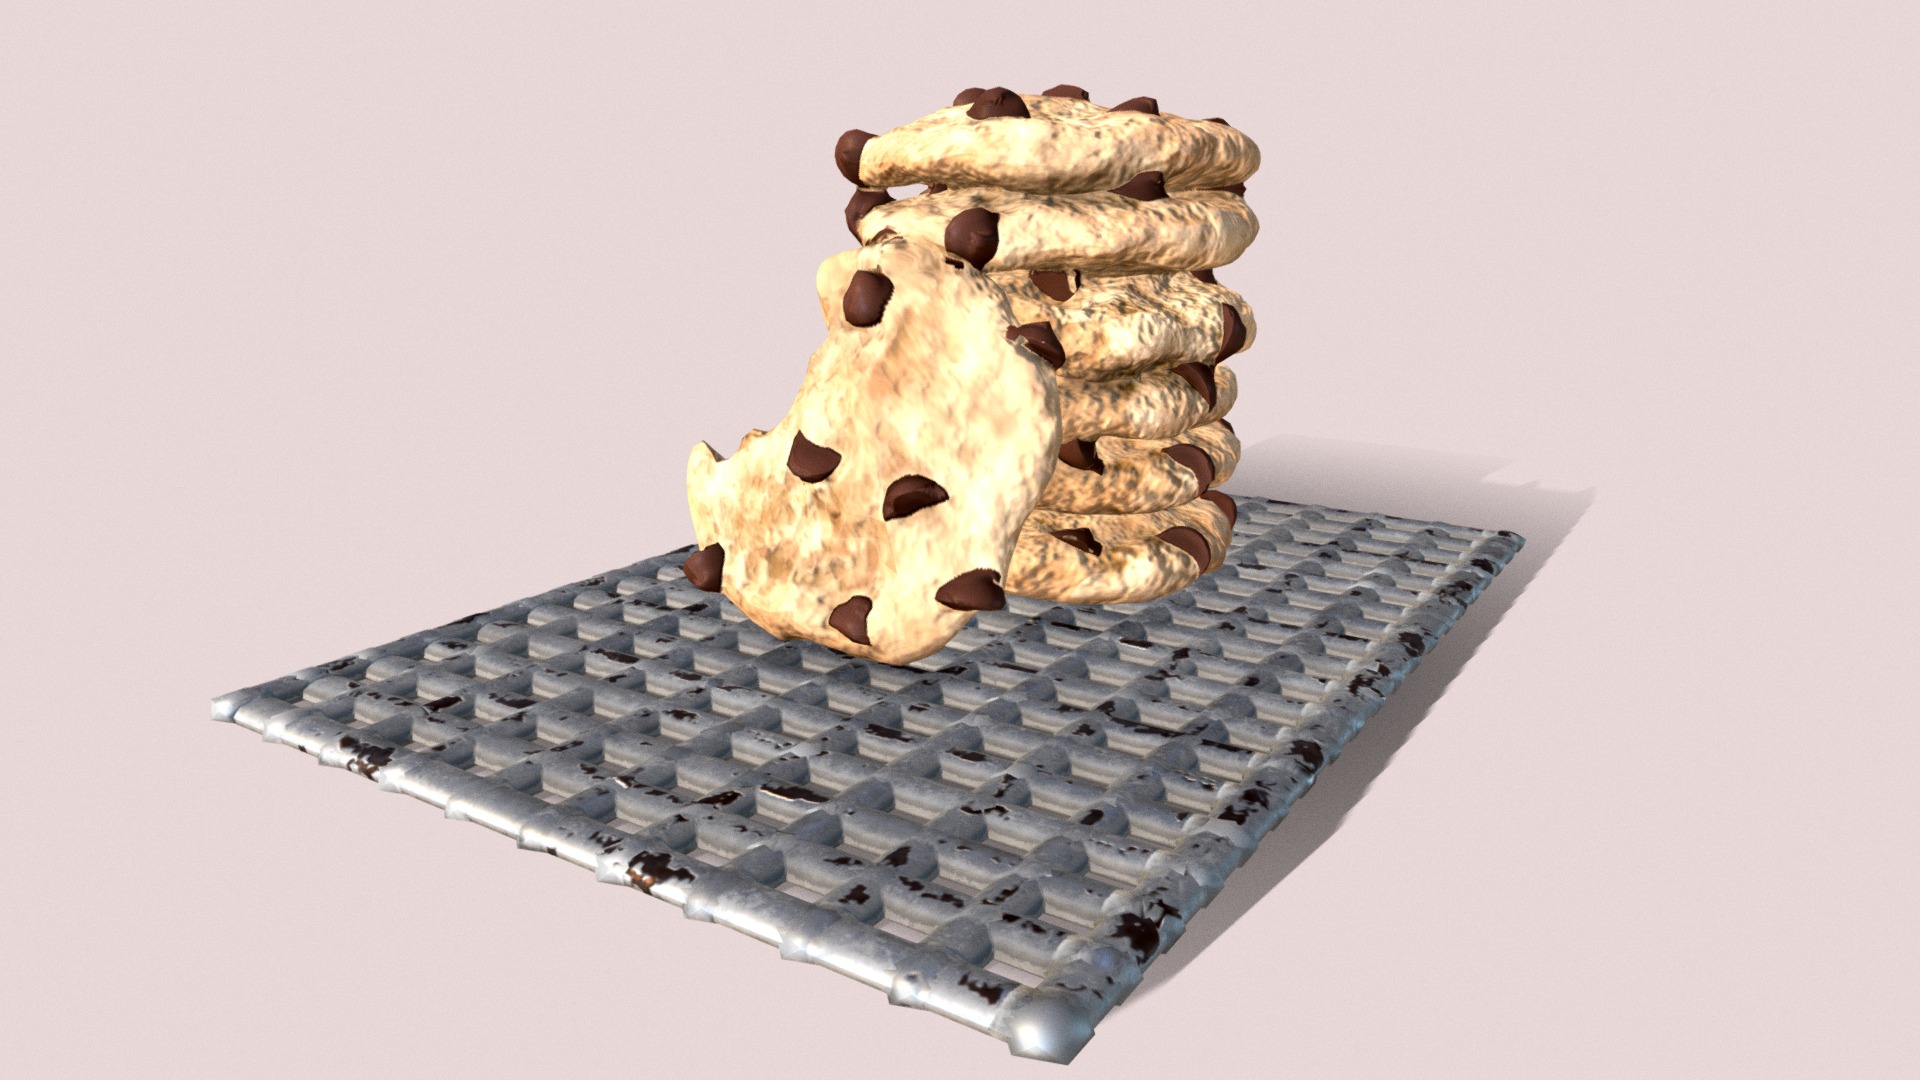 3D model Cookies With Chocolate Pieces - This is a 3D model of the Cookies With Chocolate Pieces. The 3D model is about a cookie on a keyboard.